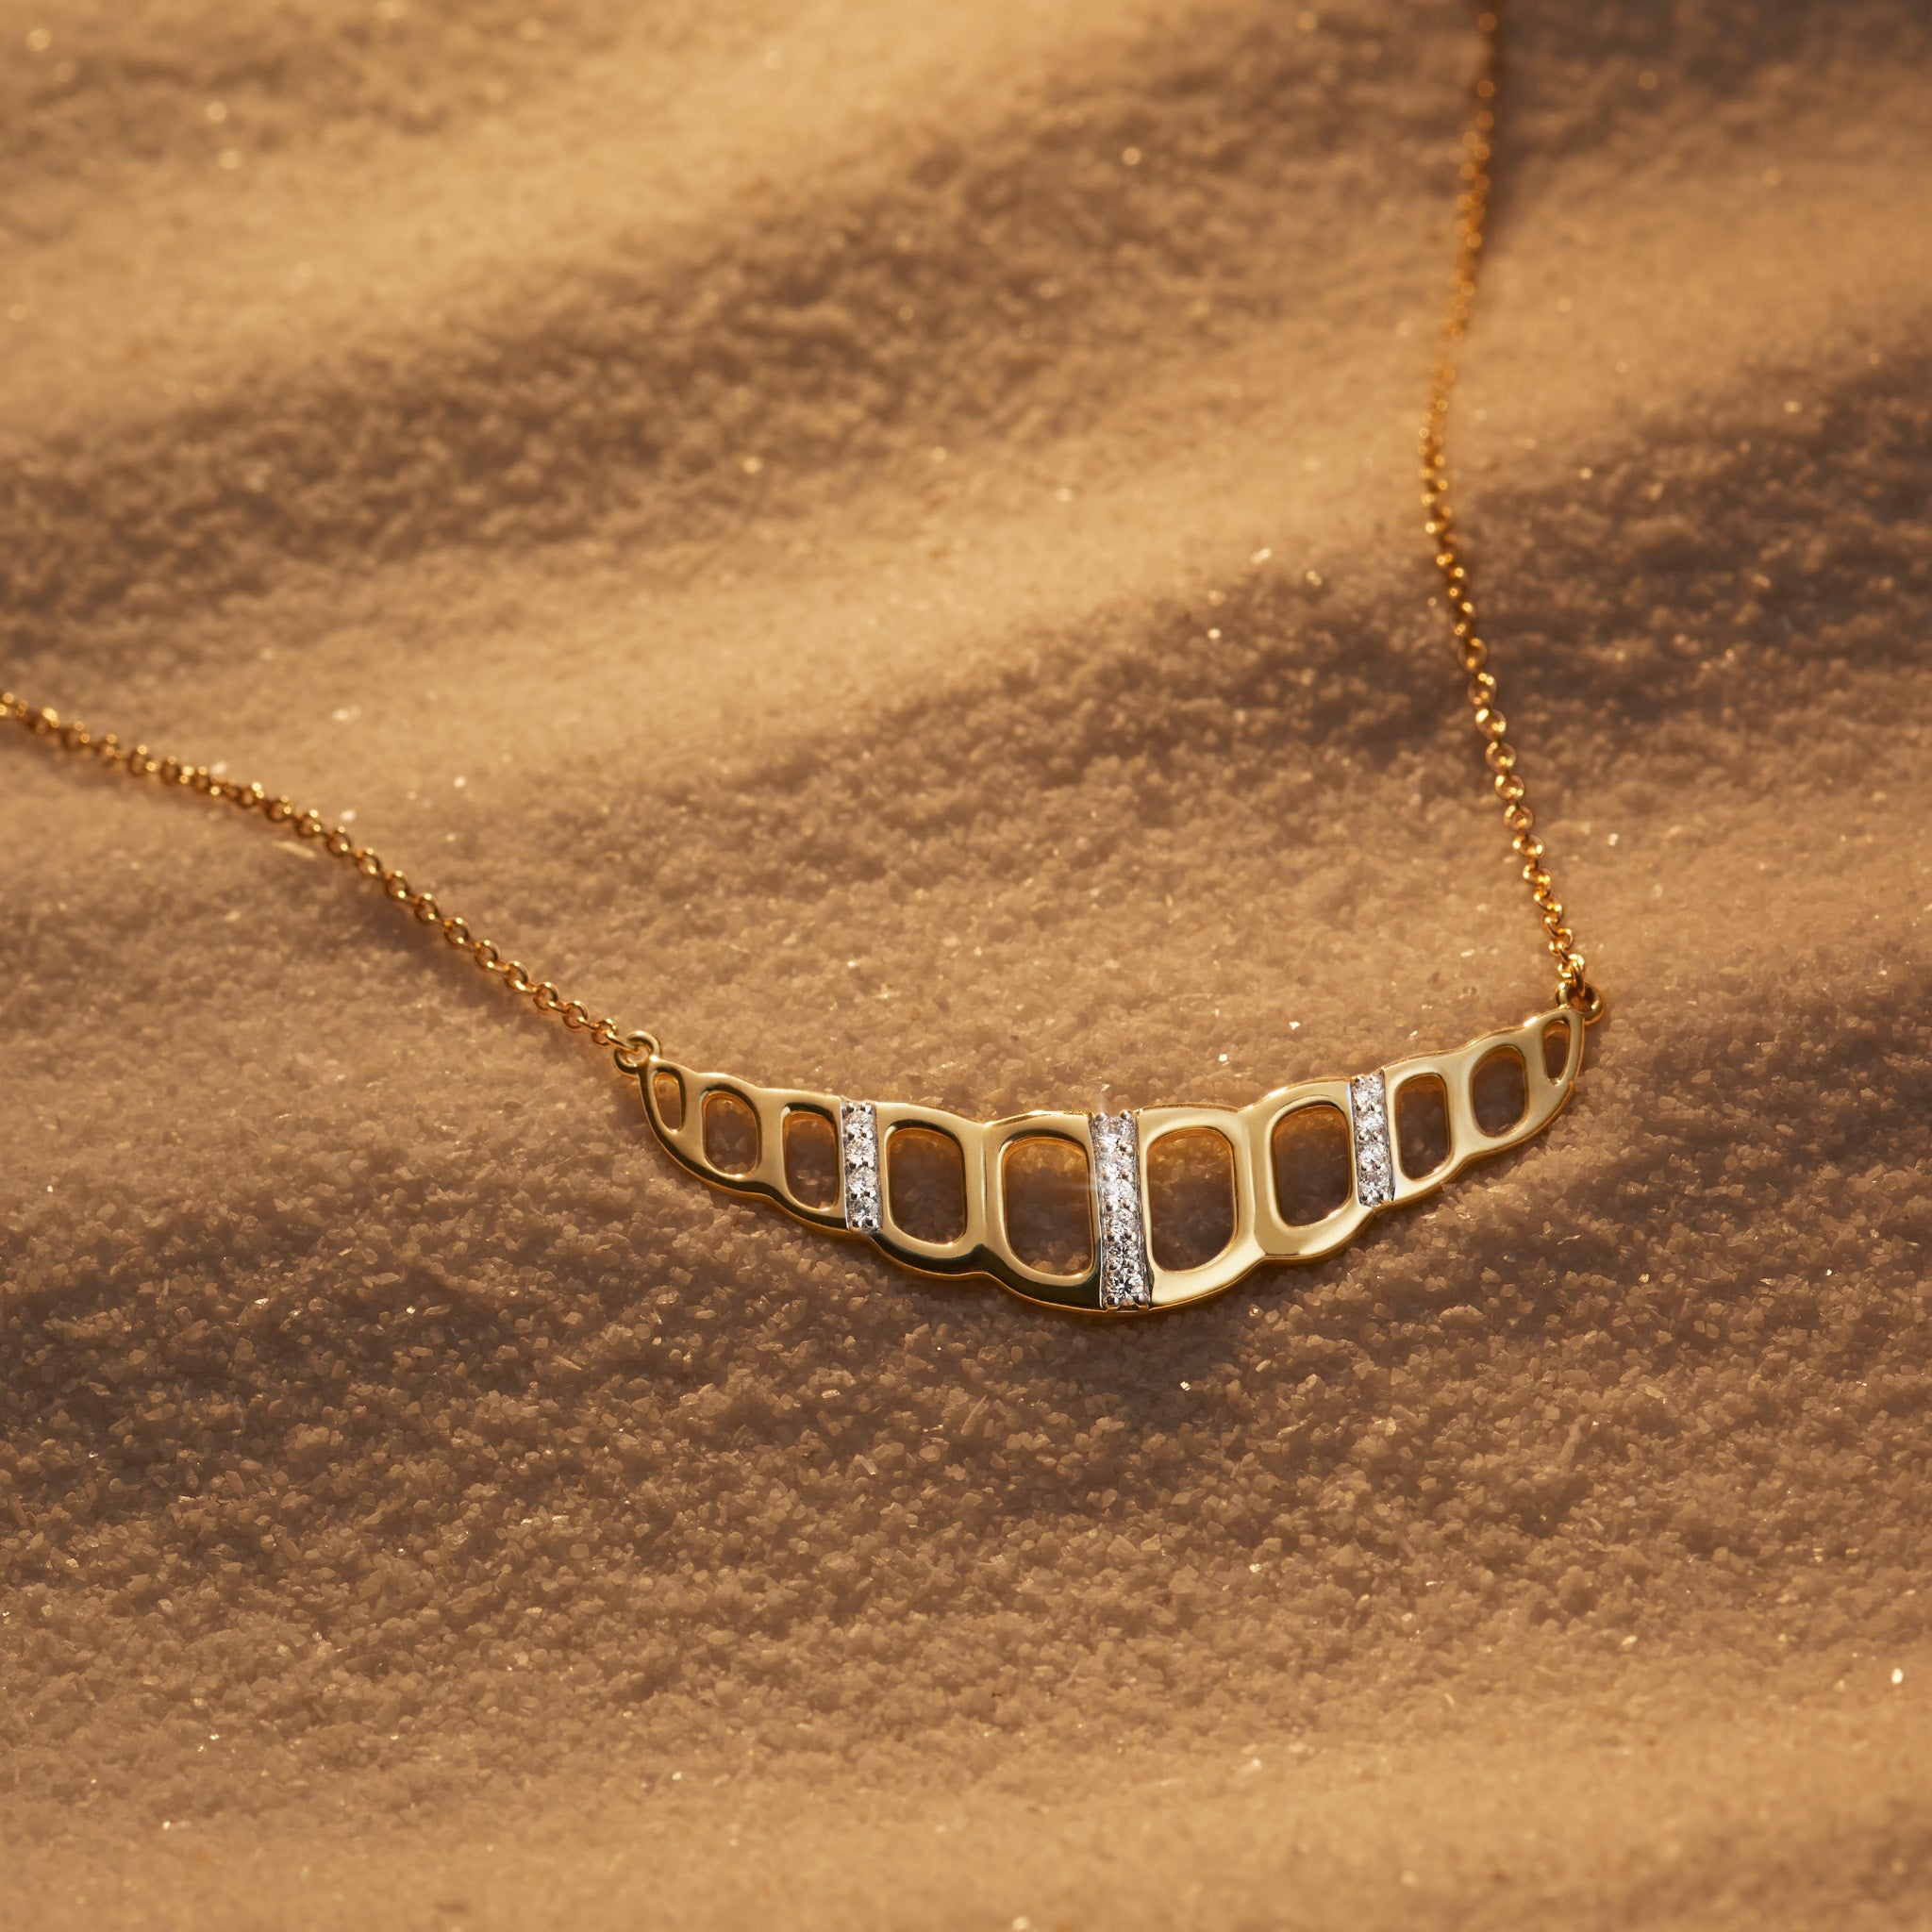 Selvaggia Necklace with Diamonds in 14K